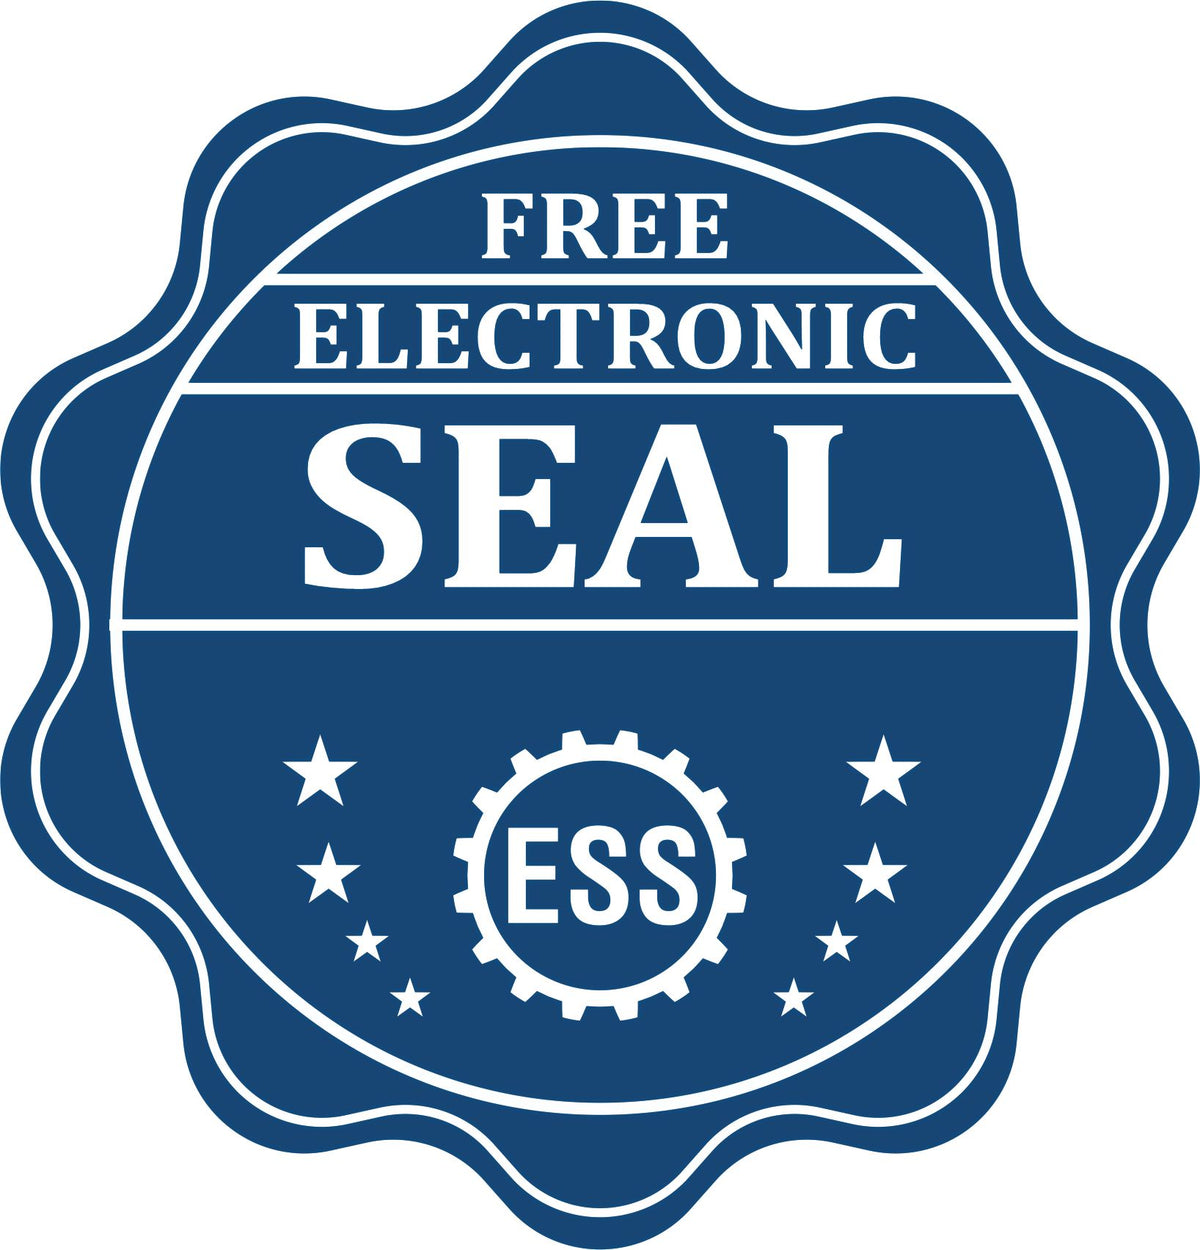 A badge showing a free electronic seal for the Heavy Duty Cast Iron Louisiana Architect Embosser with stars and the ESS gear on the emblem.